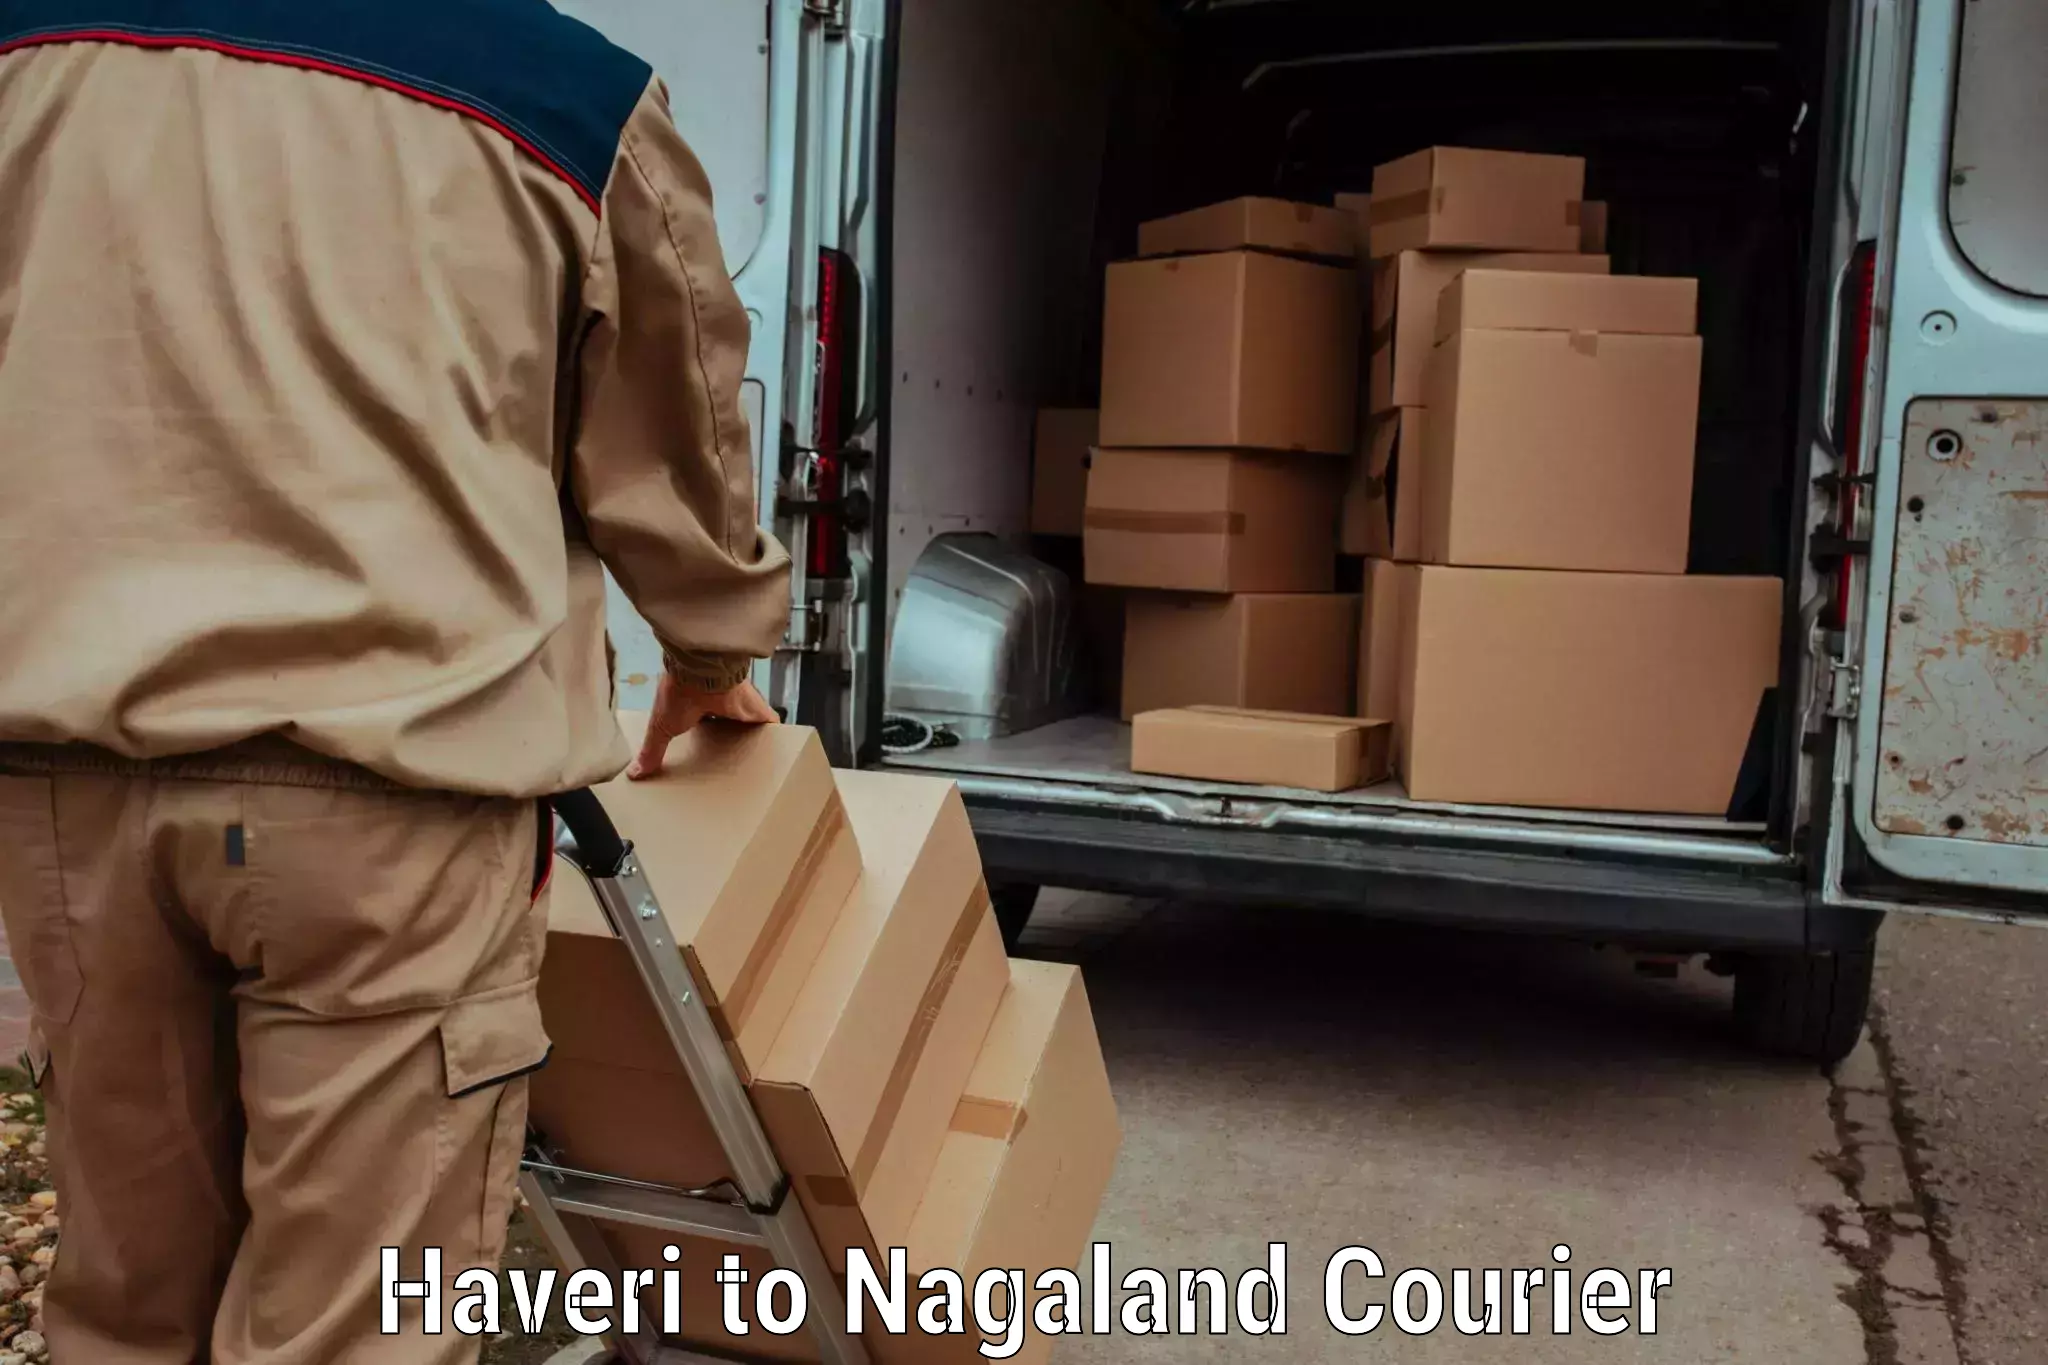 Luggage delivery network Haveri to Nagaland